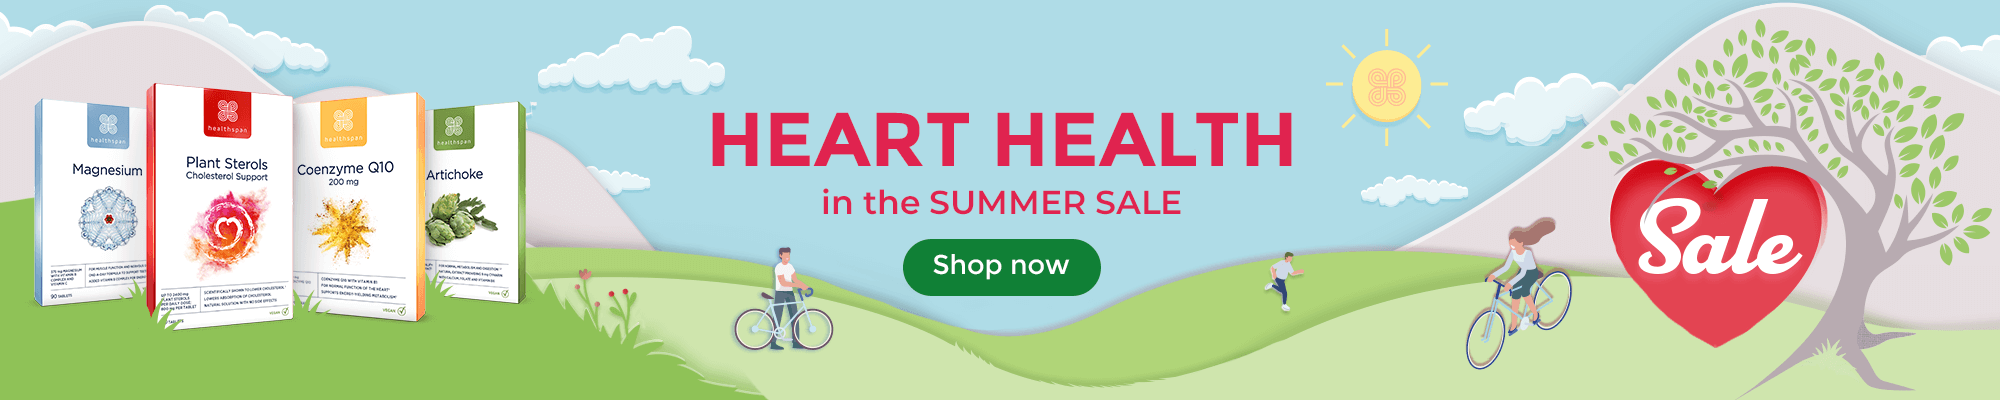 Up to 20% off Heart Health in the Summer Sale. Shop now.